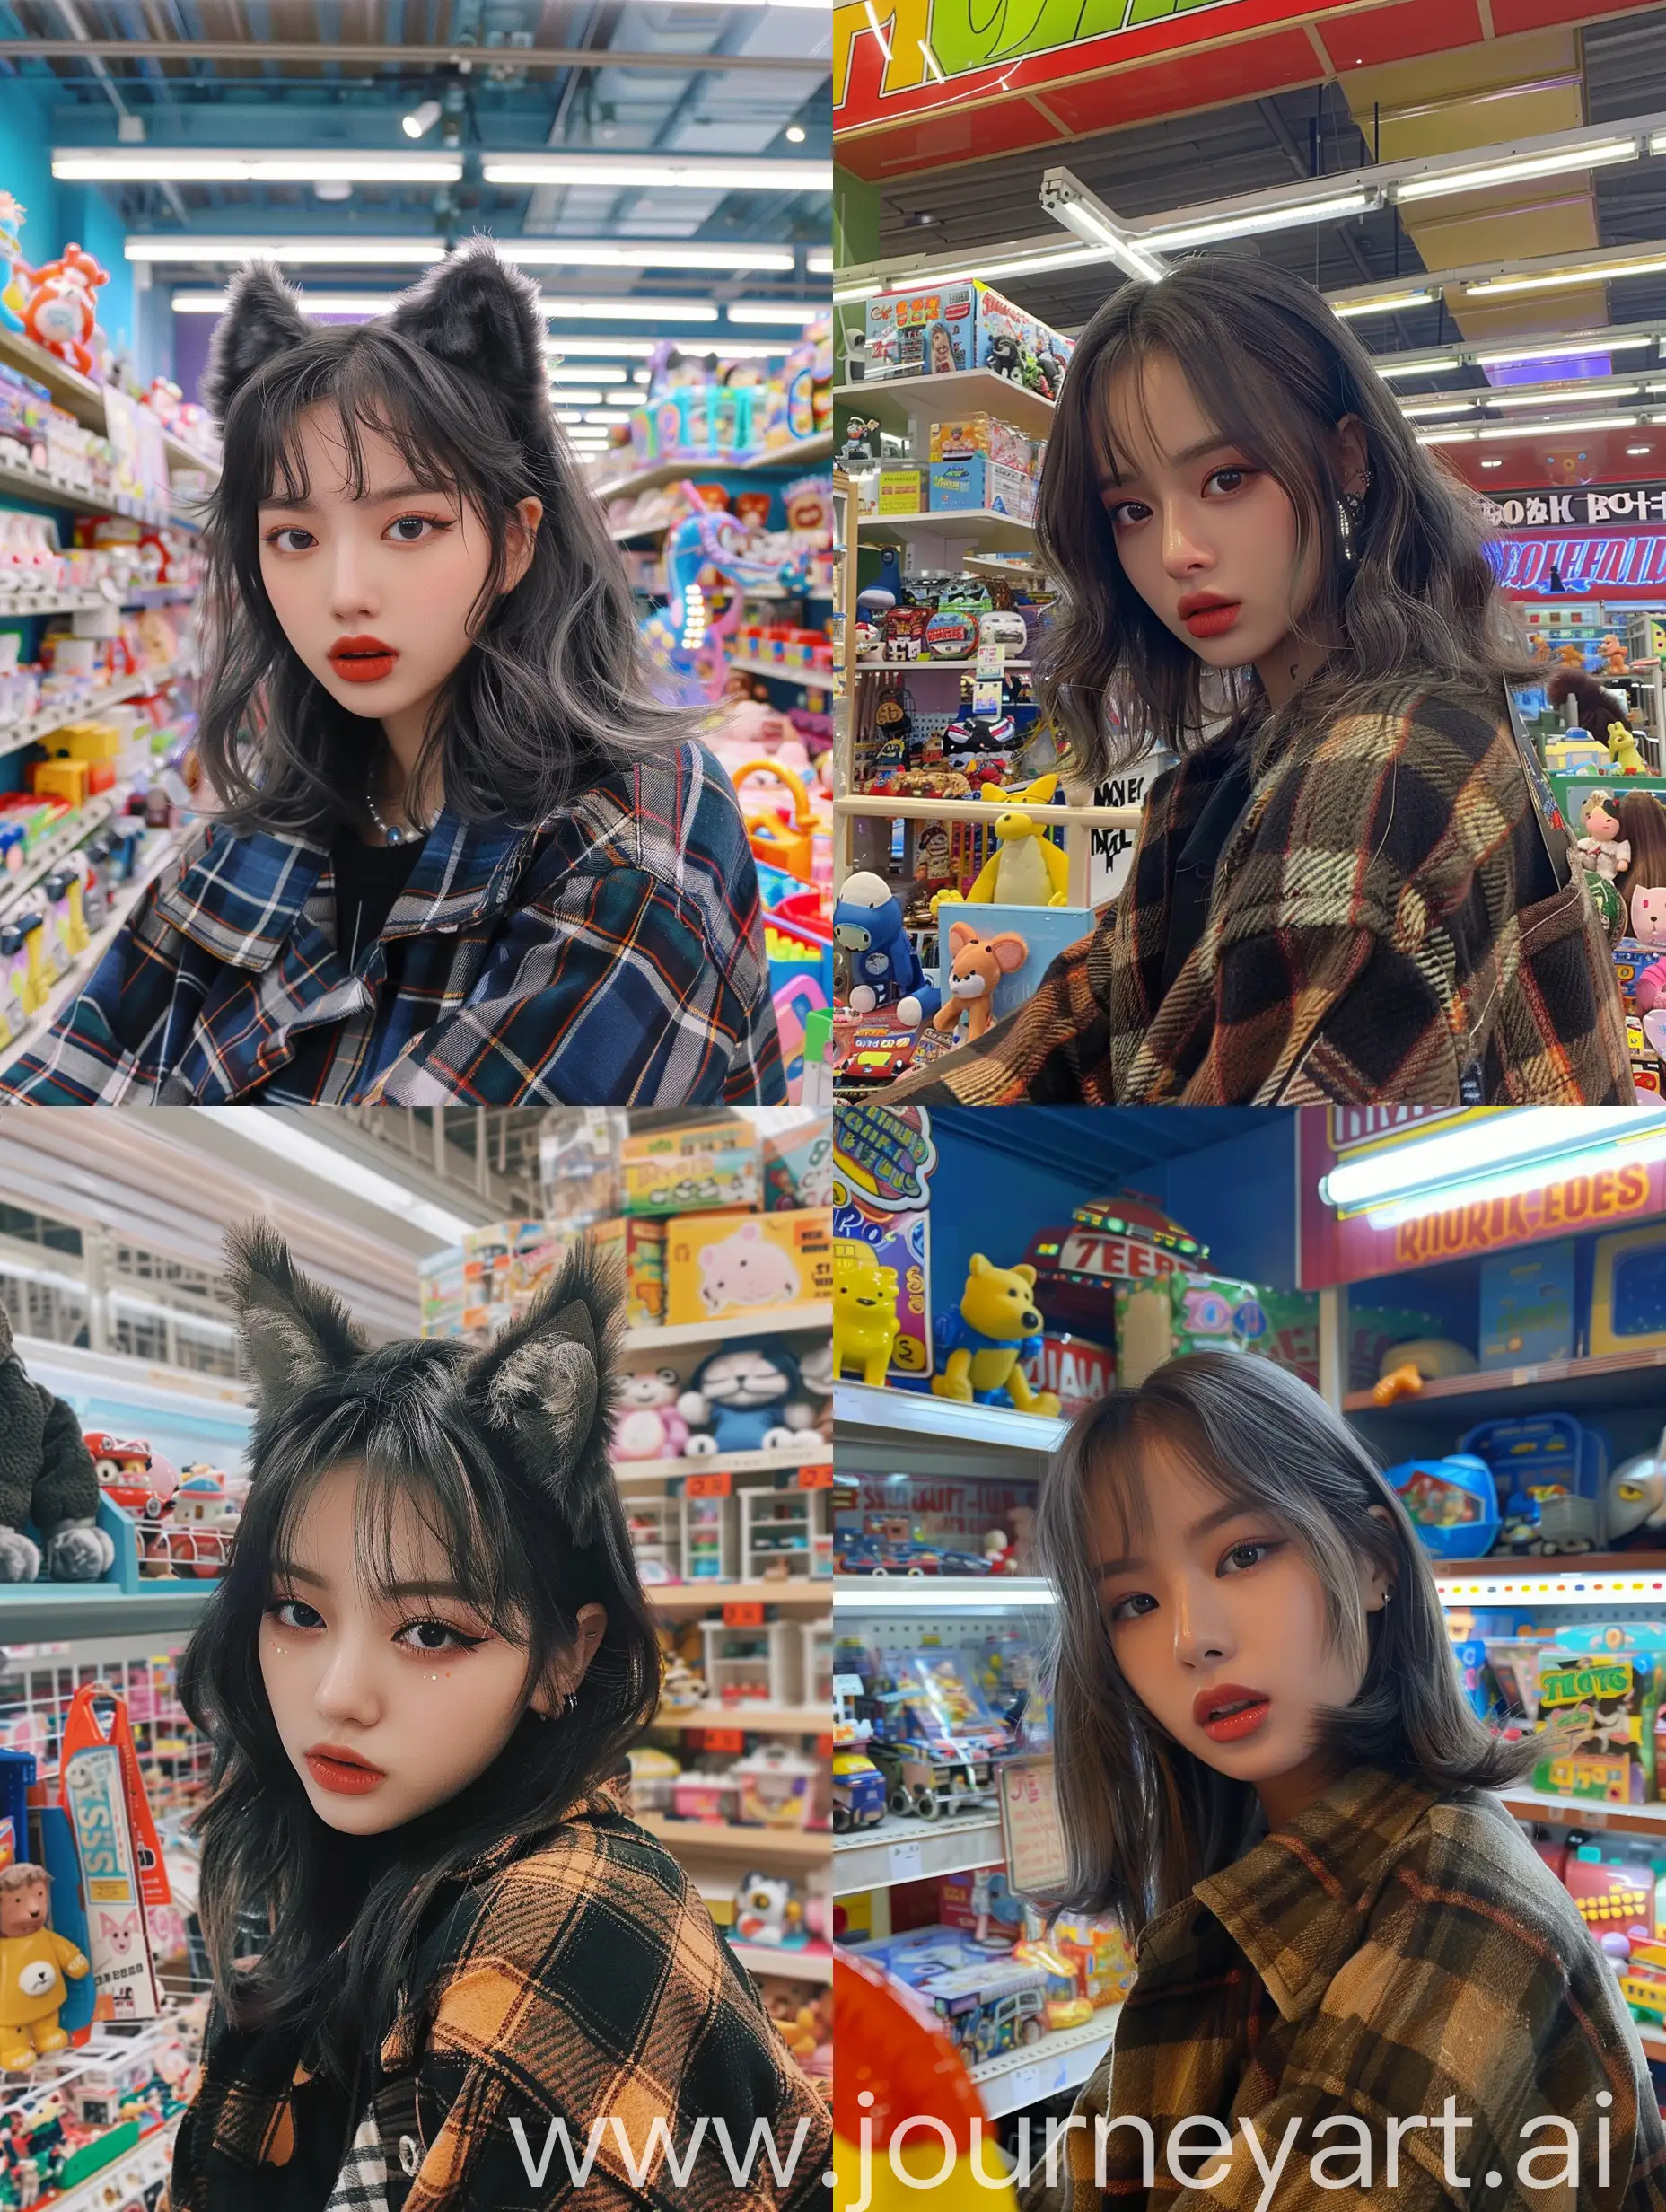 Jennie-from-Blackpink-with-Grunge-Makeup-Exploring-Toy-Store